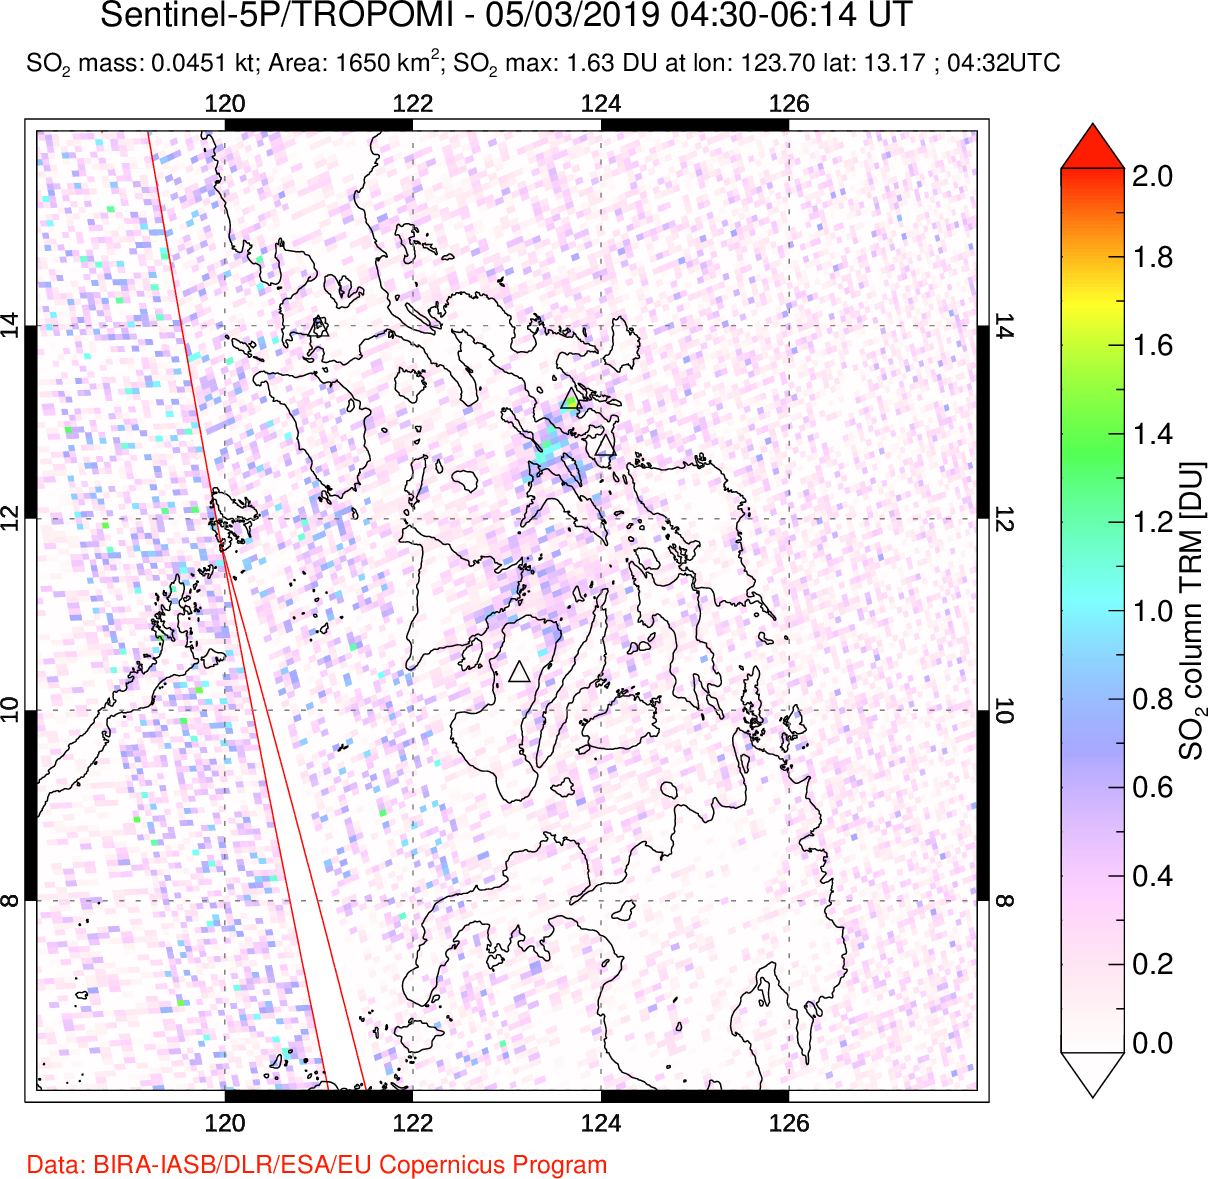 A sulfur dioxide image over Philippines on May 03, 2019.